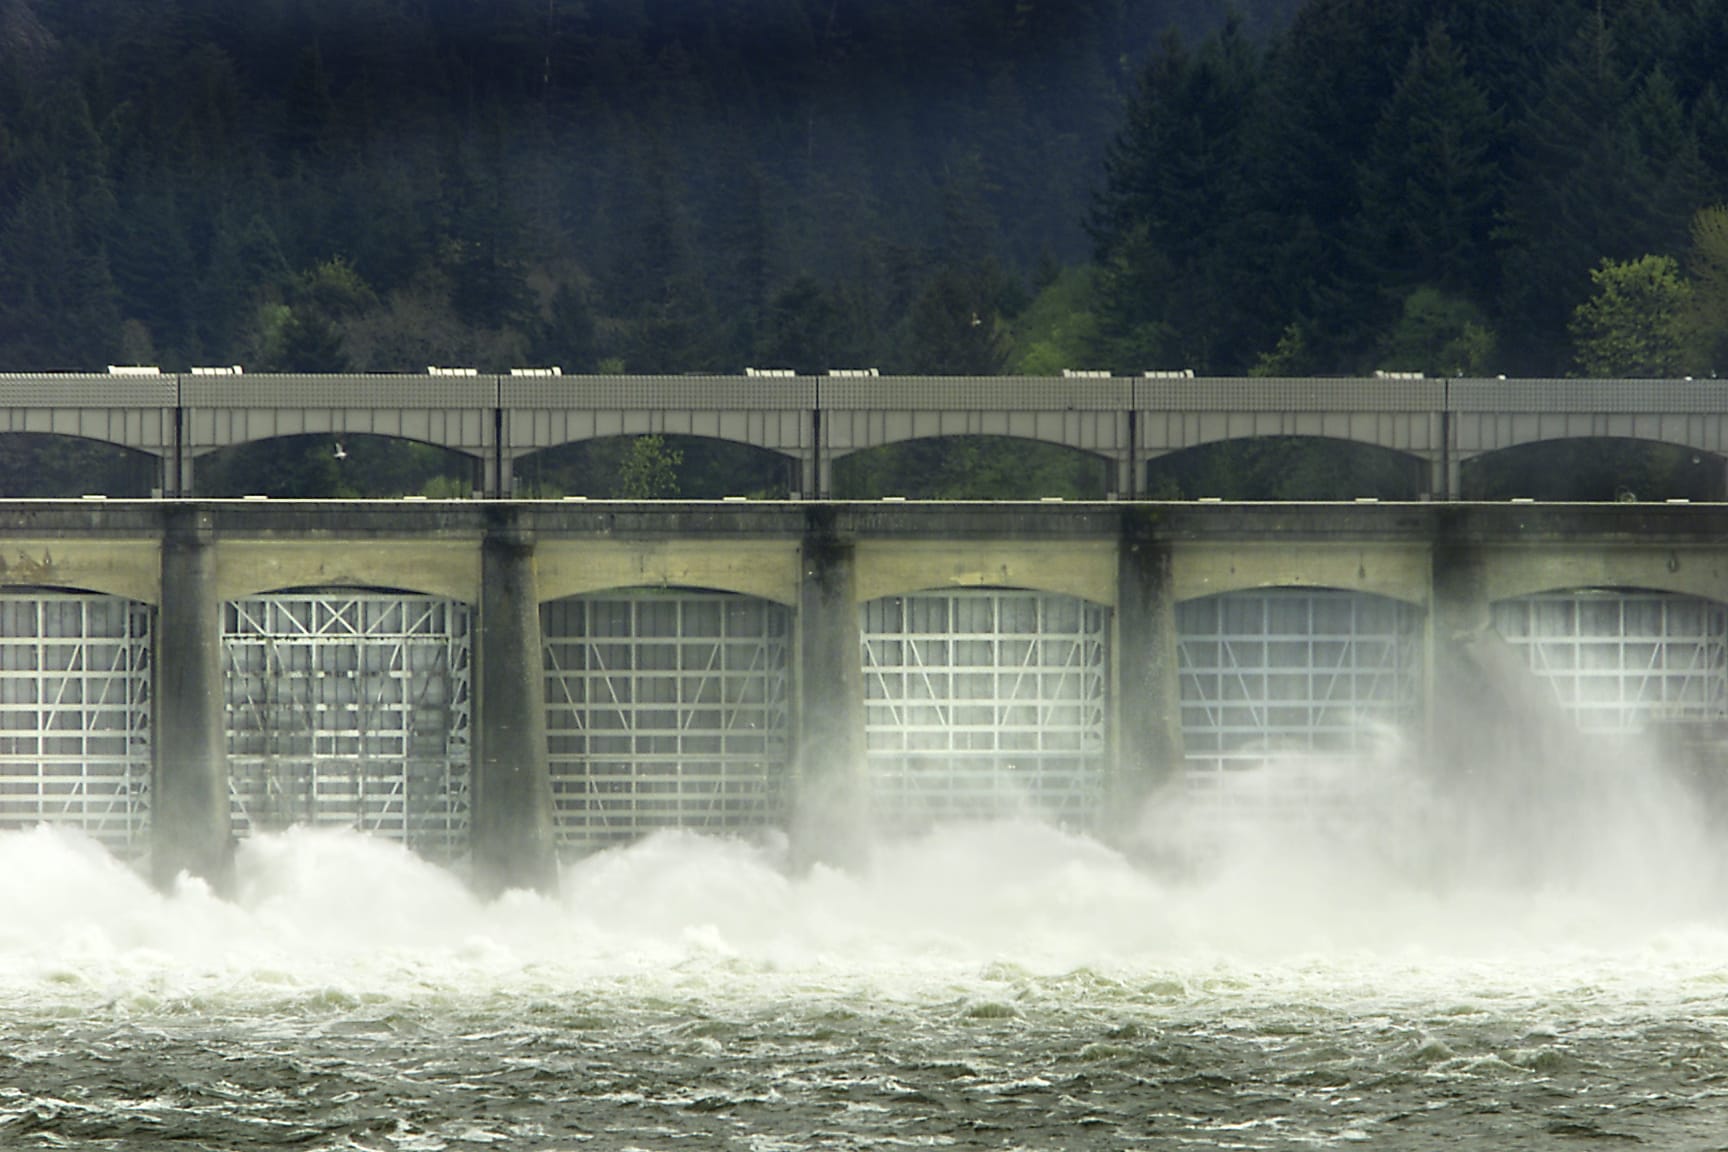 April 18, 2003 -- Jeremiah Coughlan -- Water roils through the spillway and mist whips up the gates at Bonneville Dam,  releasing water at a rate of 263,000 cubic feet per second.